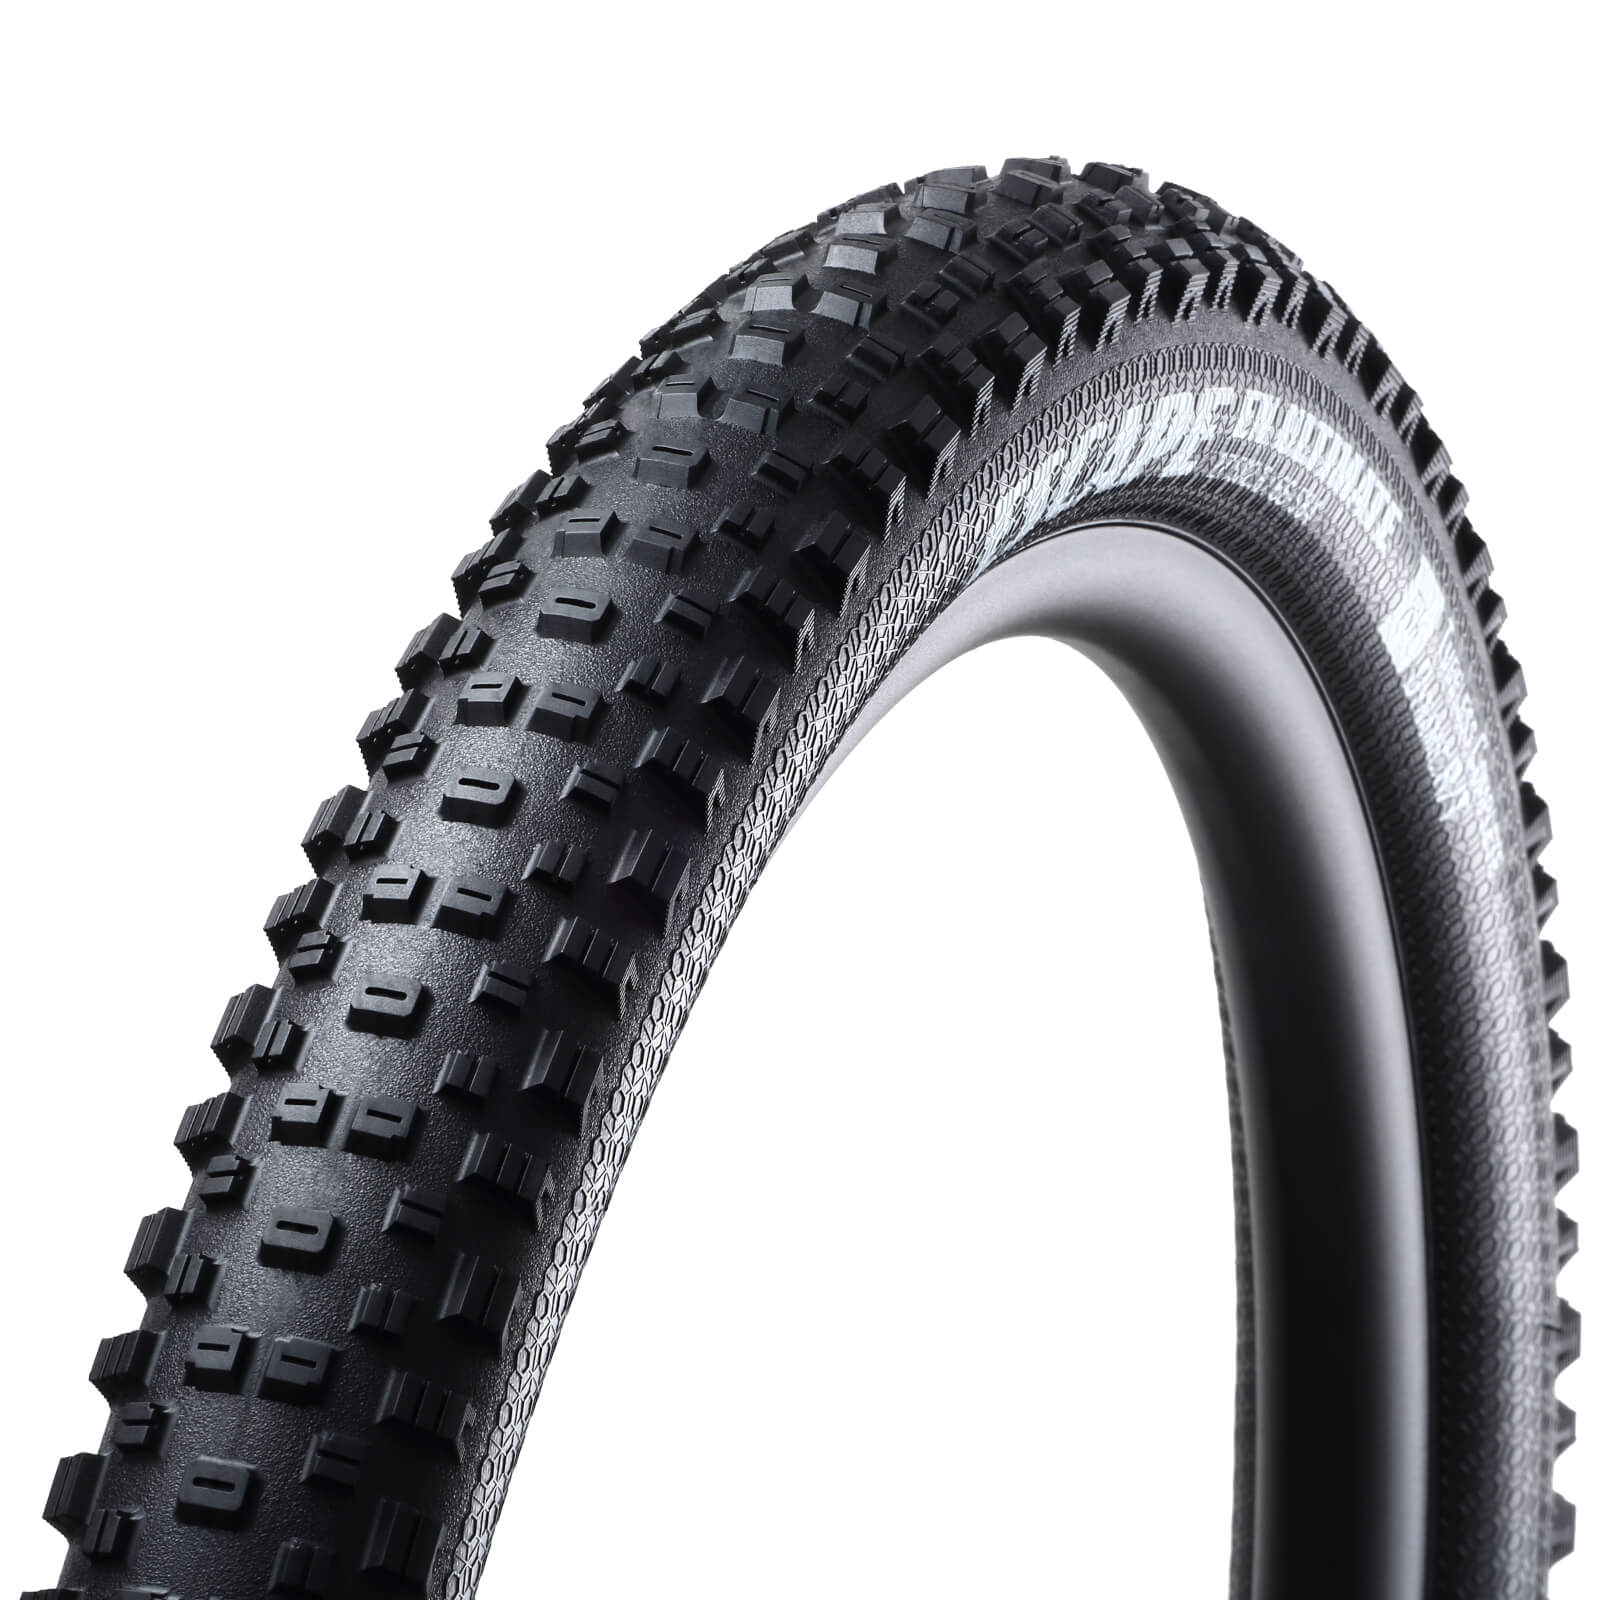 Goodyear Escape Ultimate Tubeless MTB Tyre - 29in x 2.35in - Black